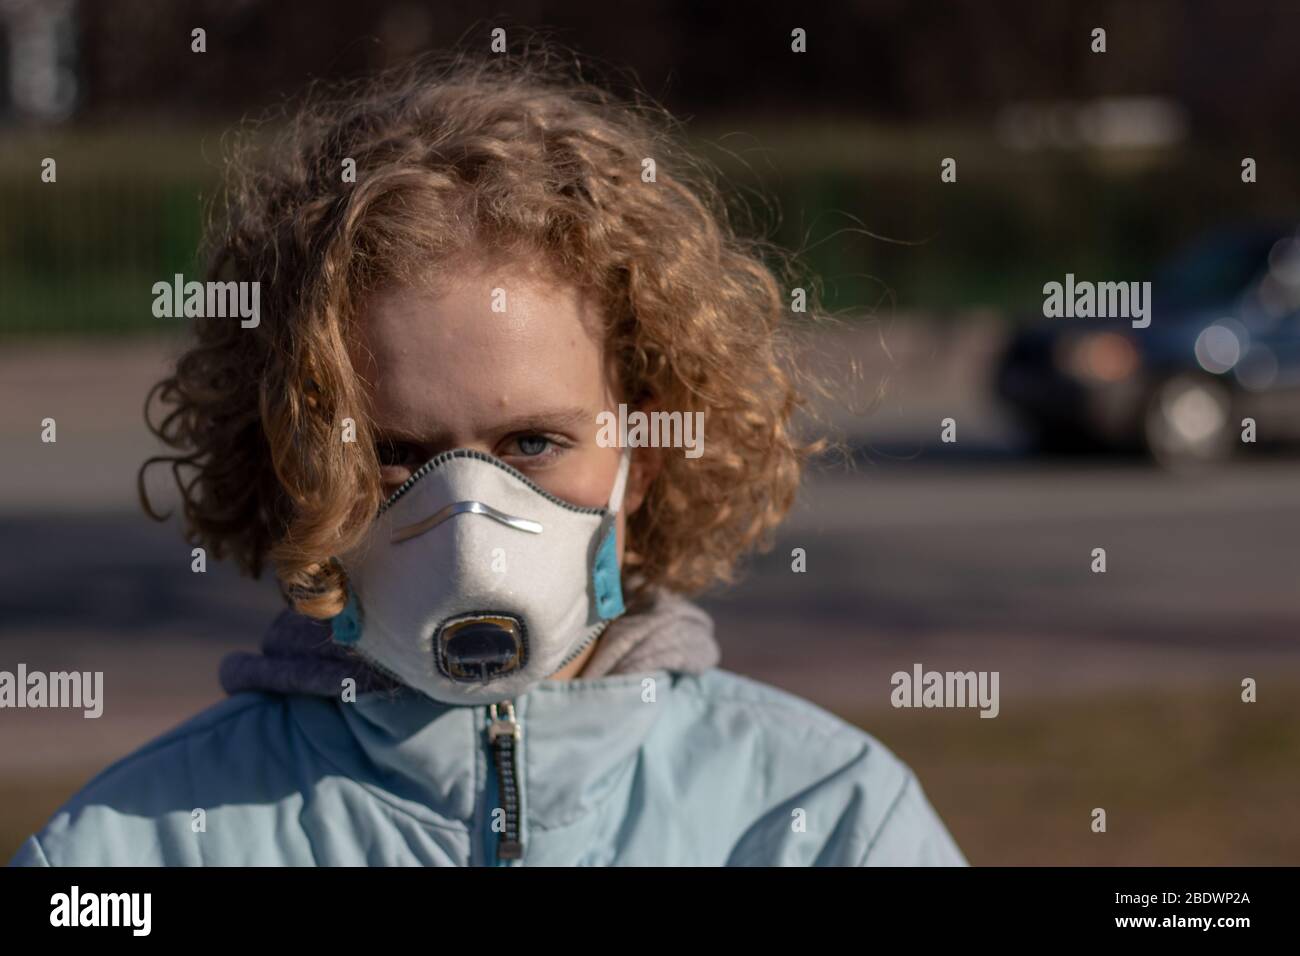 Yound girl with blonde hair with serious face with protective medical mask. Angry look. Ecology and climate disaster concept. Copy space Stock Photo